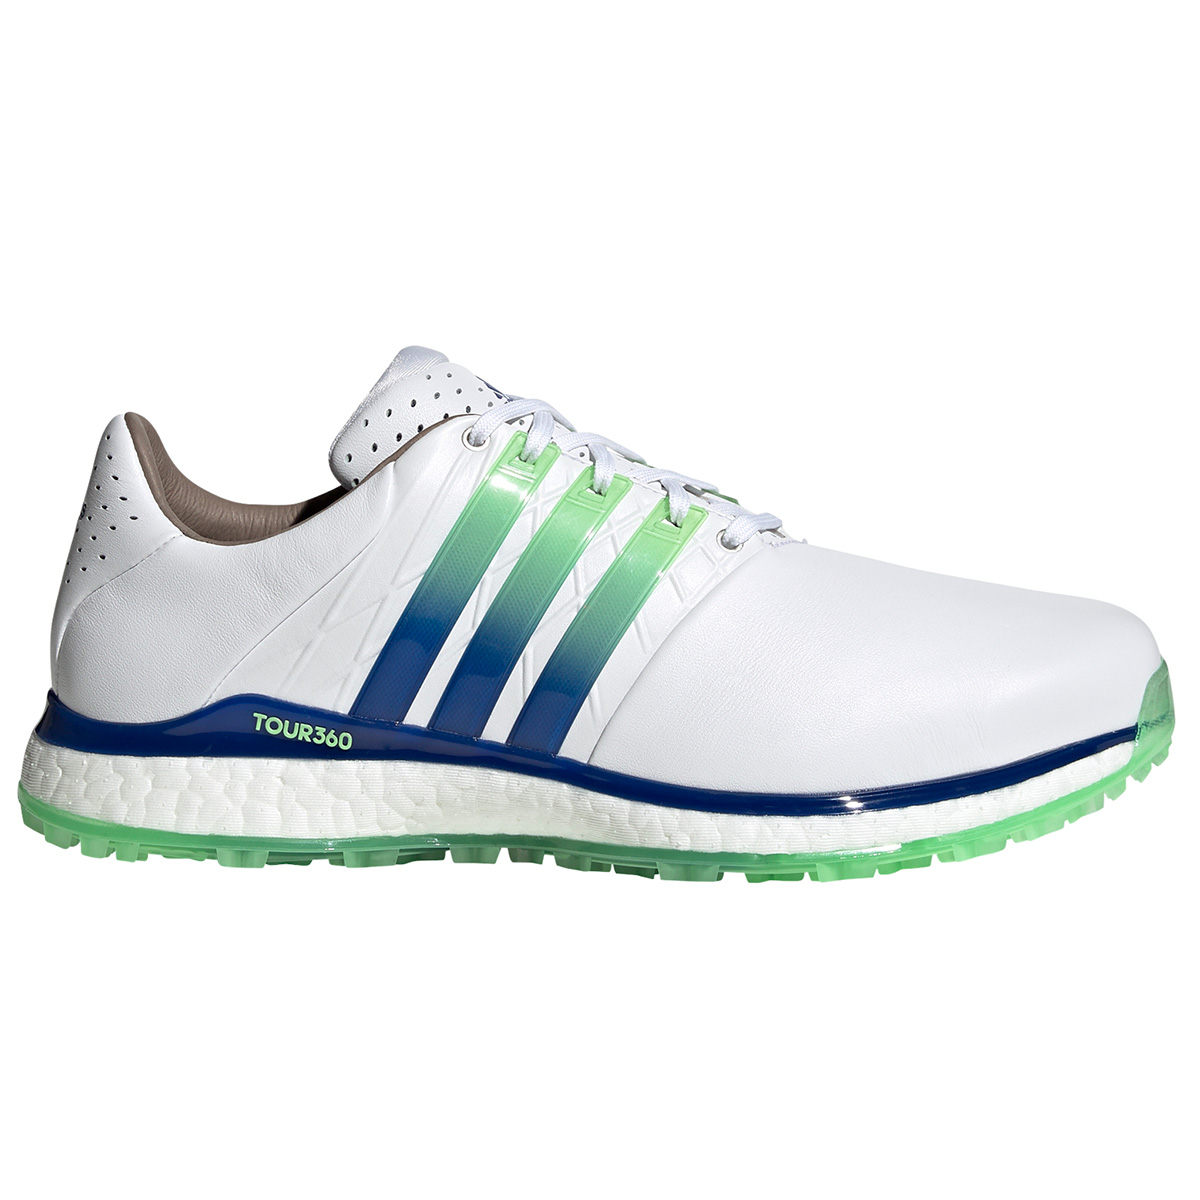 adidas Golf Tour 360 XT-SL 2 Shoes from 